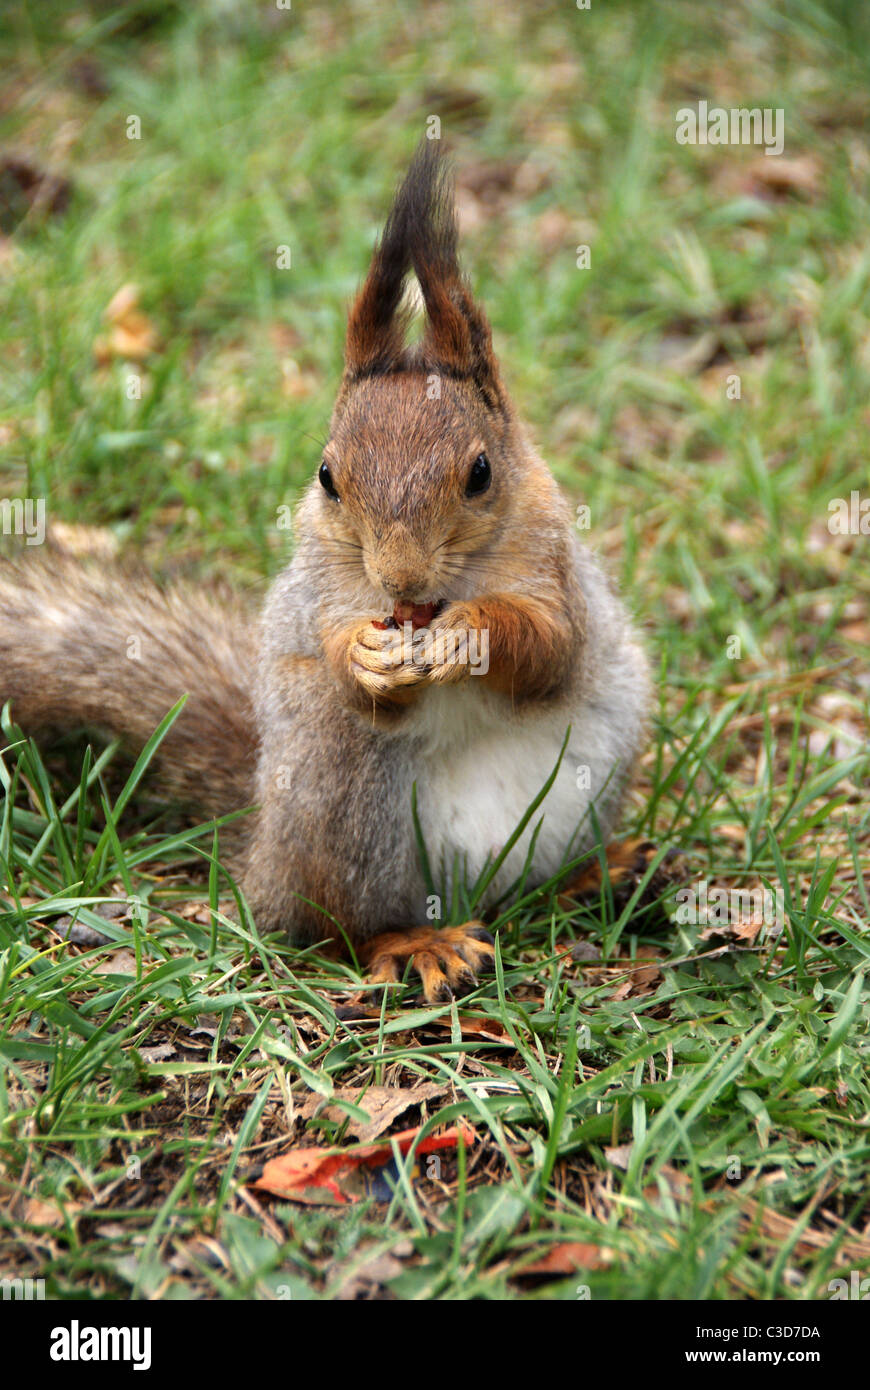 Squirrel is on a grass and eats a nut Stock Photo